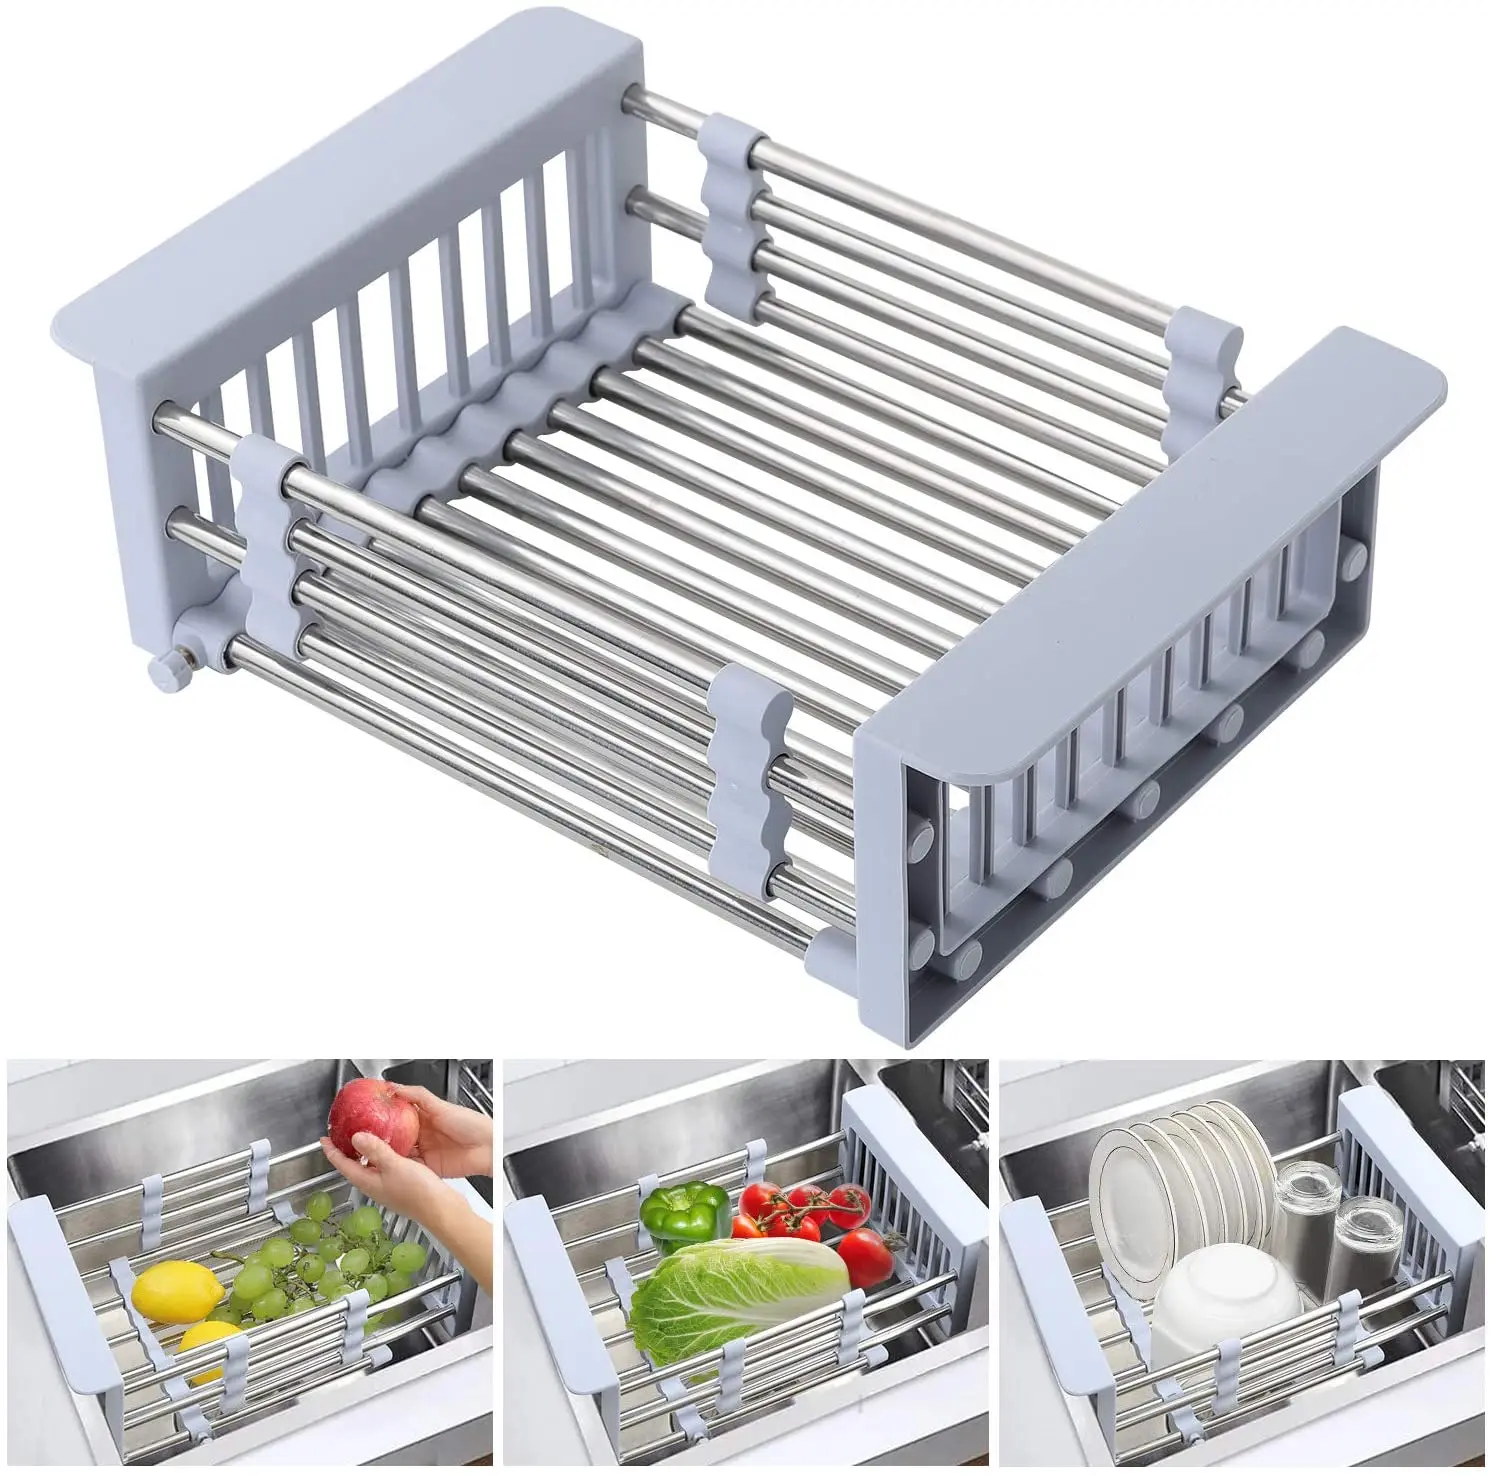 Expandable Dish Drying Rack Over Sink Stainless Steel Adjustable Dish Basket 